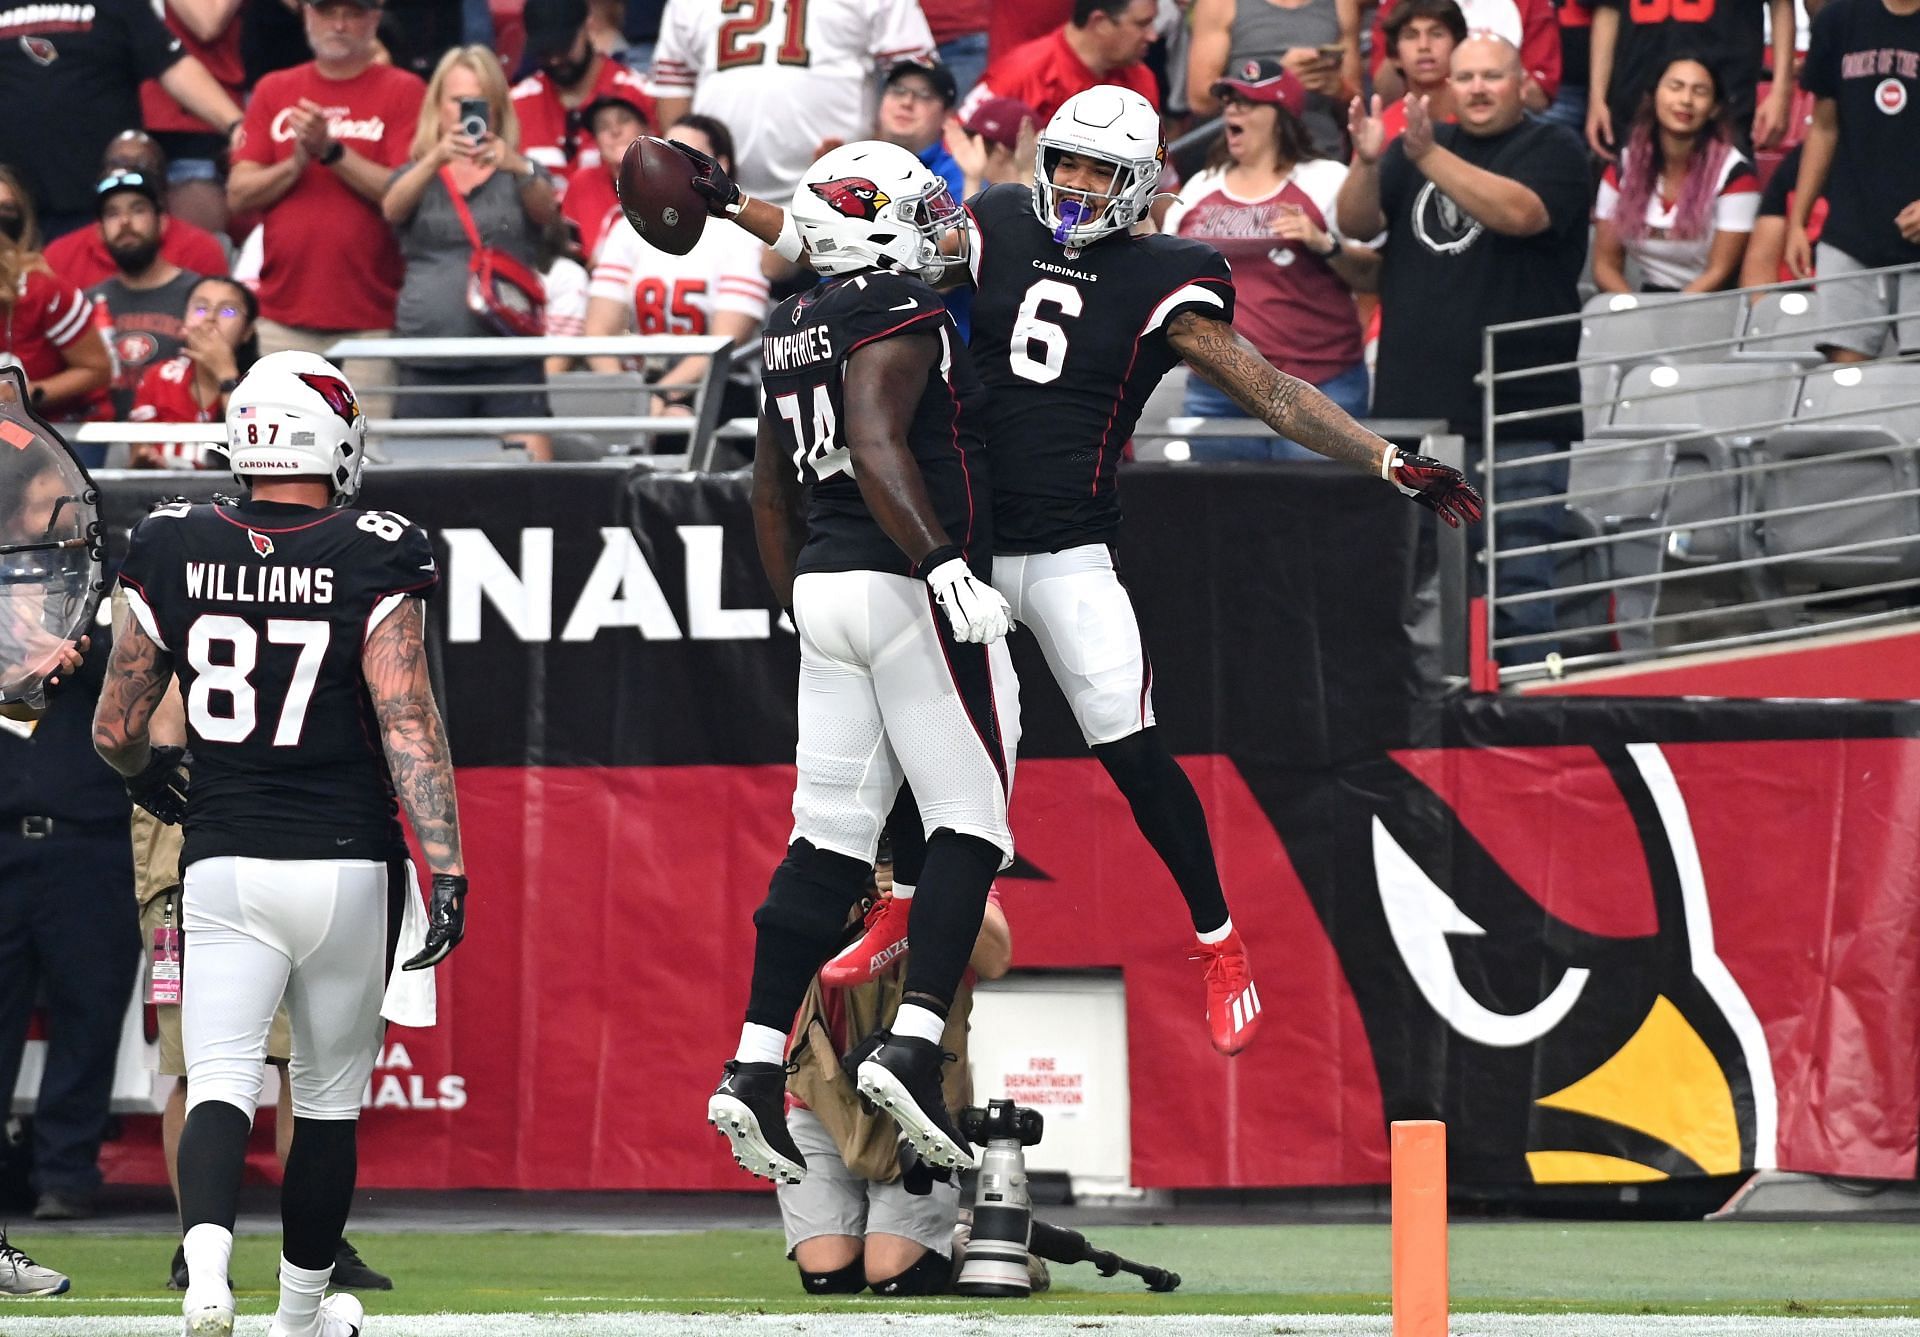 With a 6-0 record the Cardinals are still the team to beat in the 2021 NFL season 